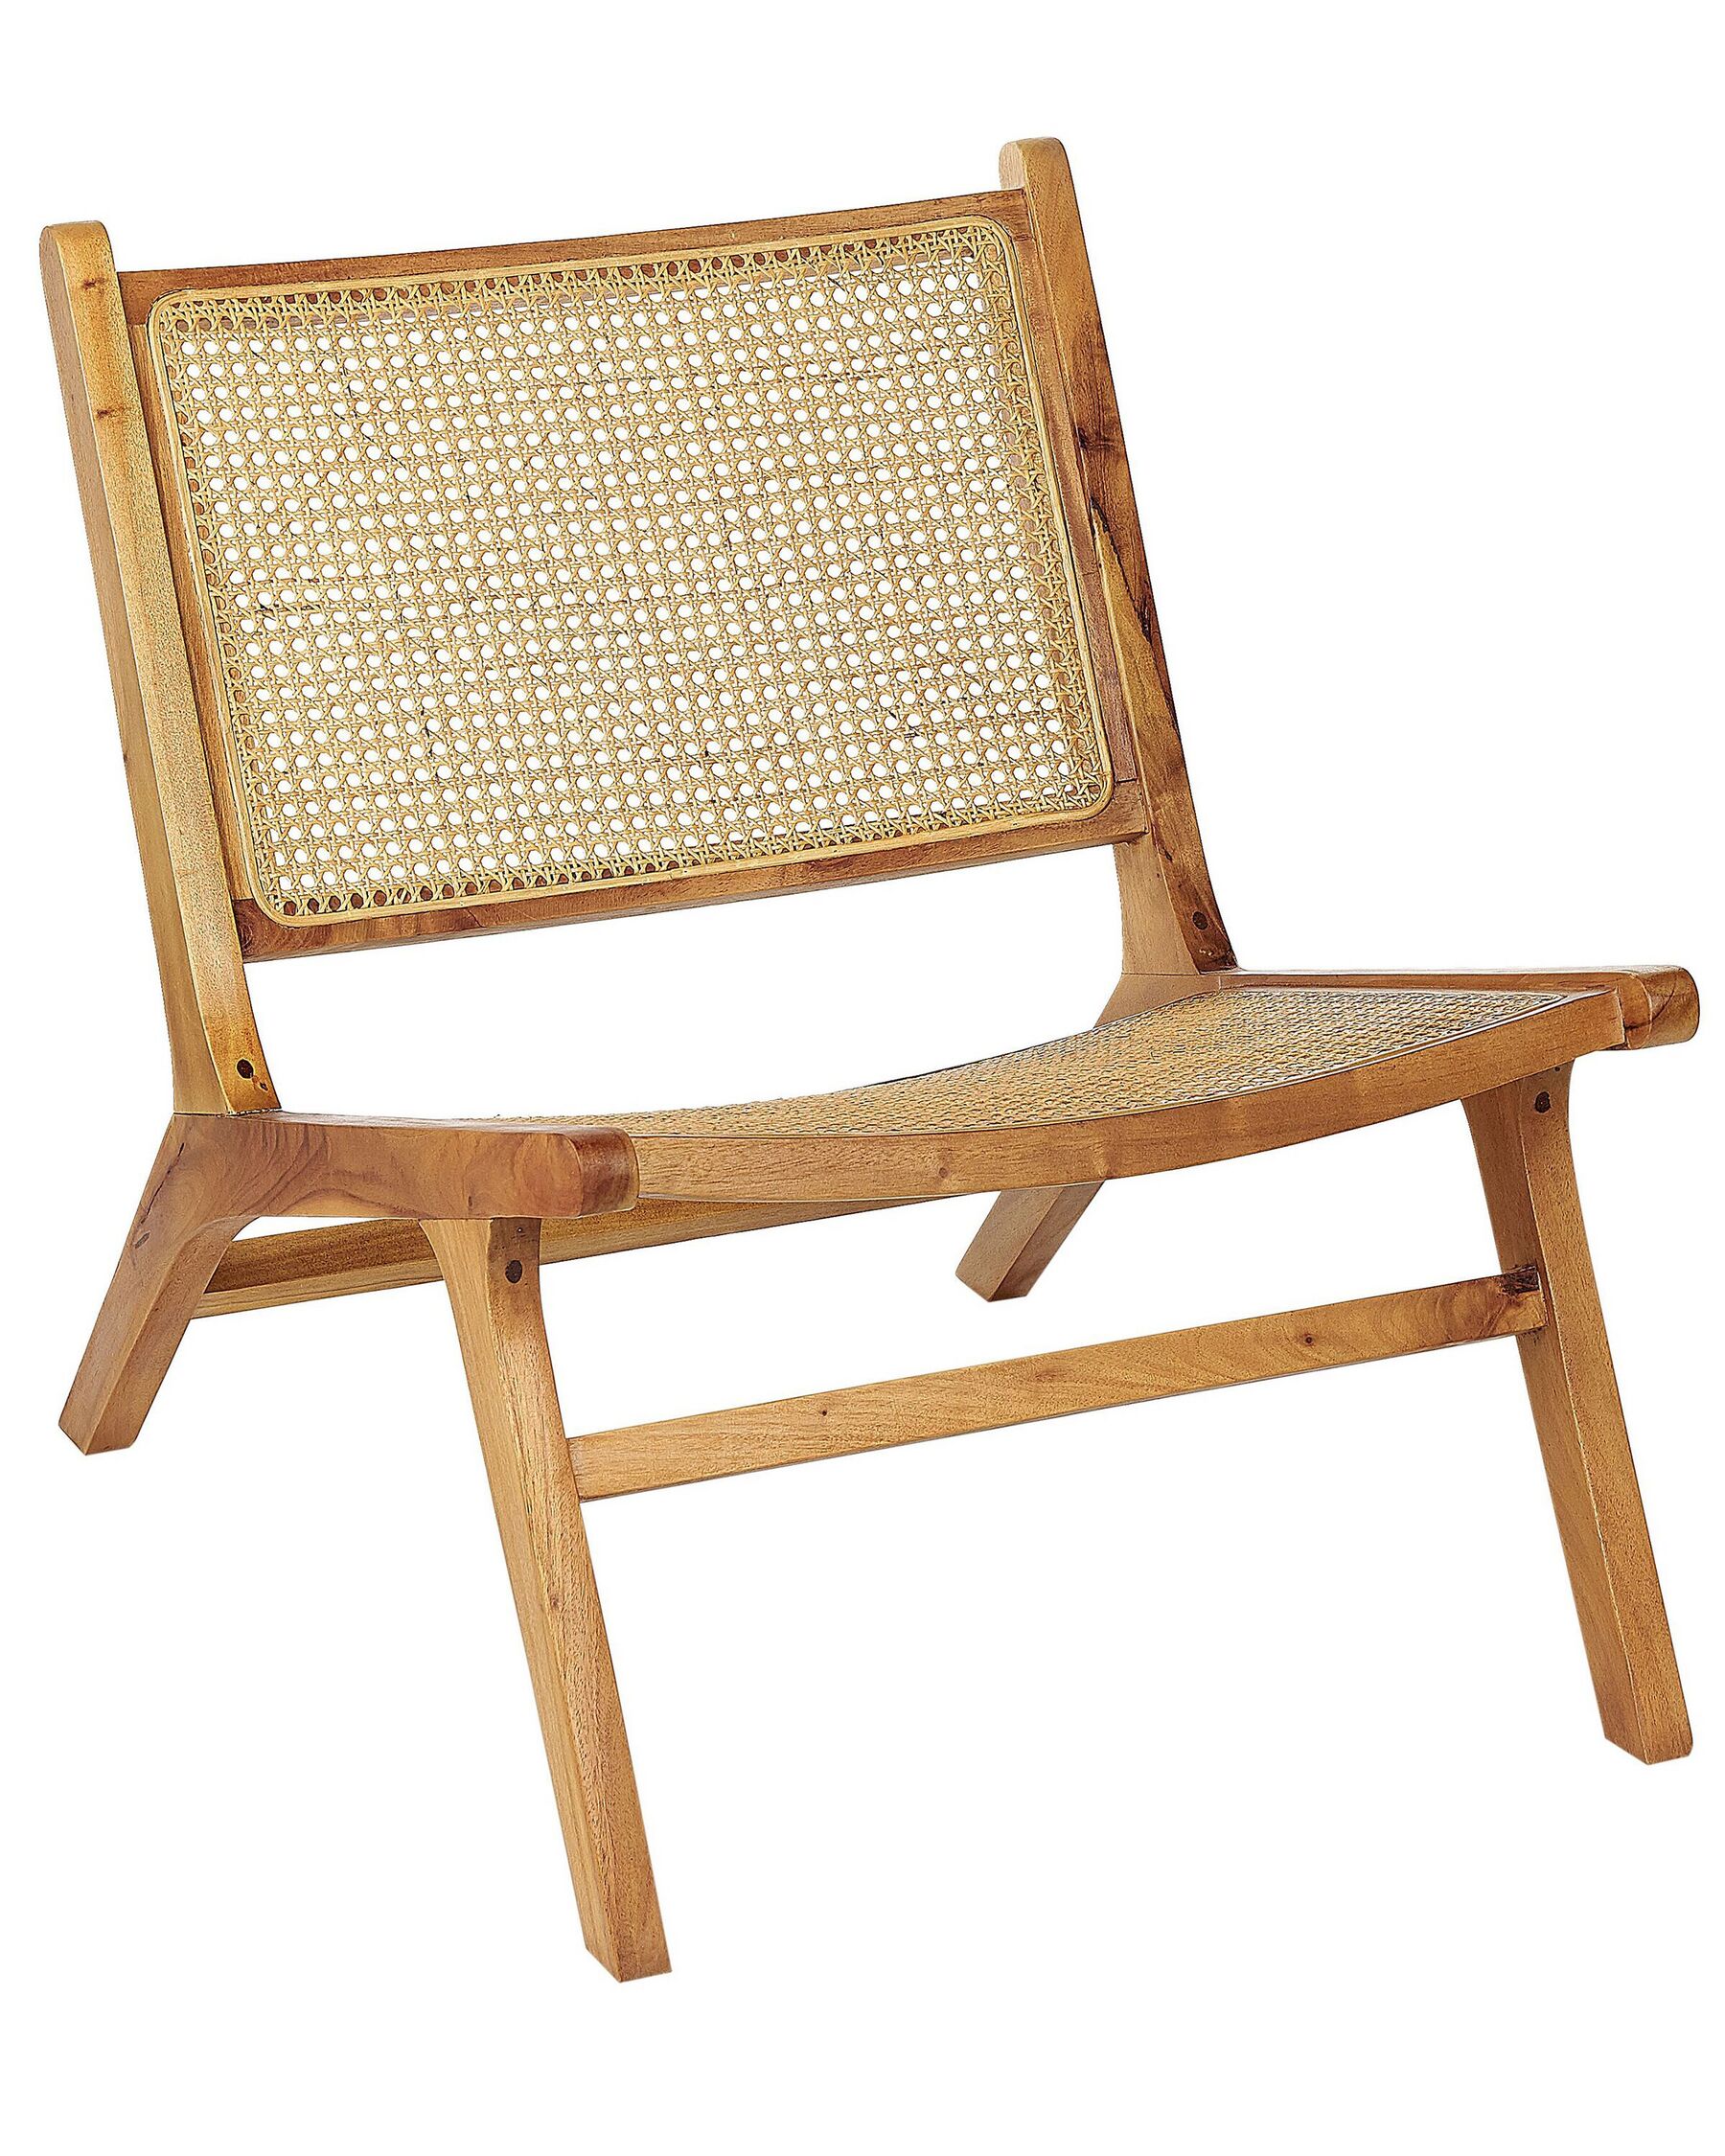 Wooden Chair with Rattan Braid Light Wood MIDDLETOWN_921499